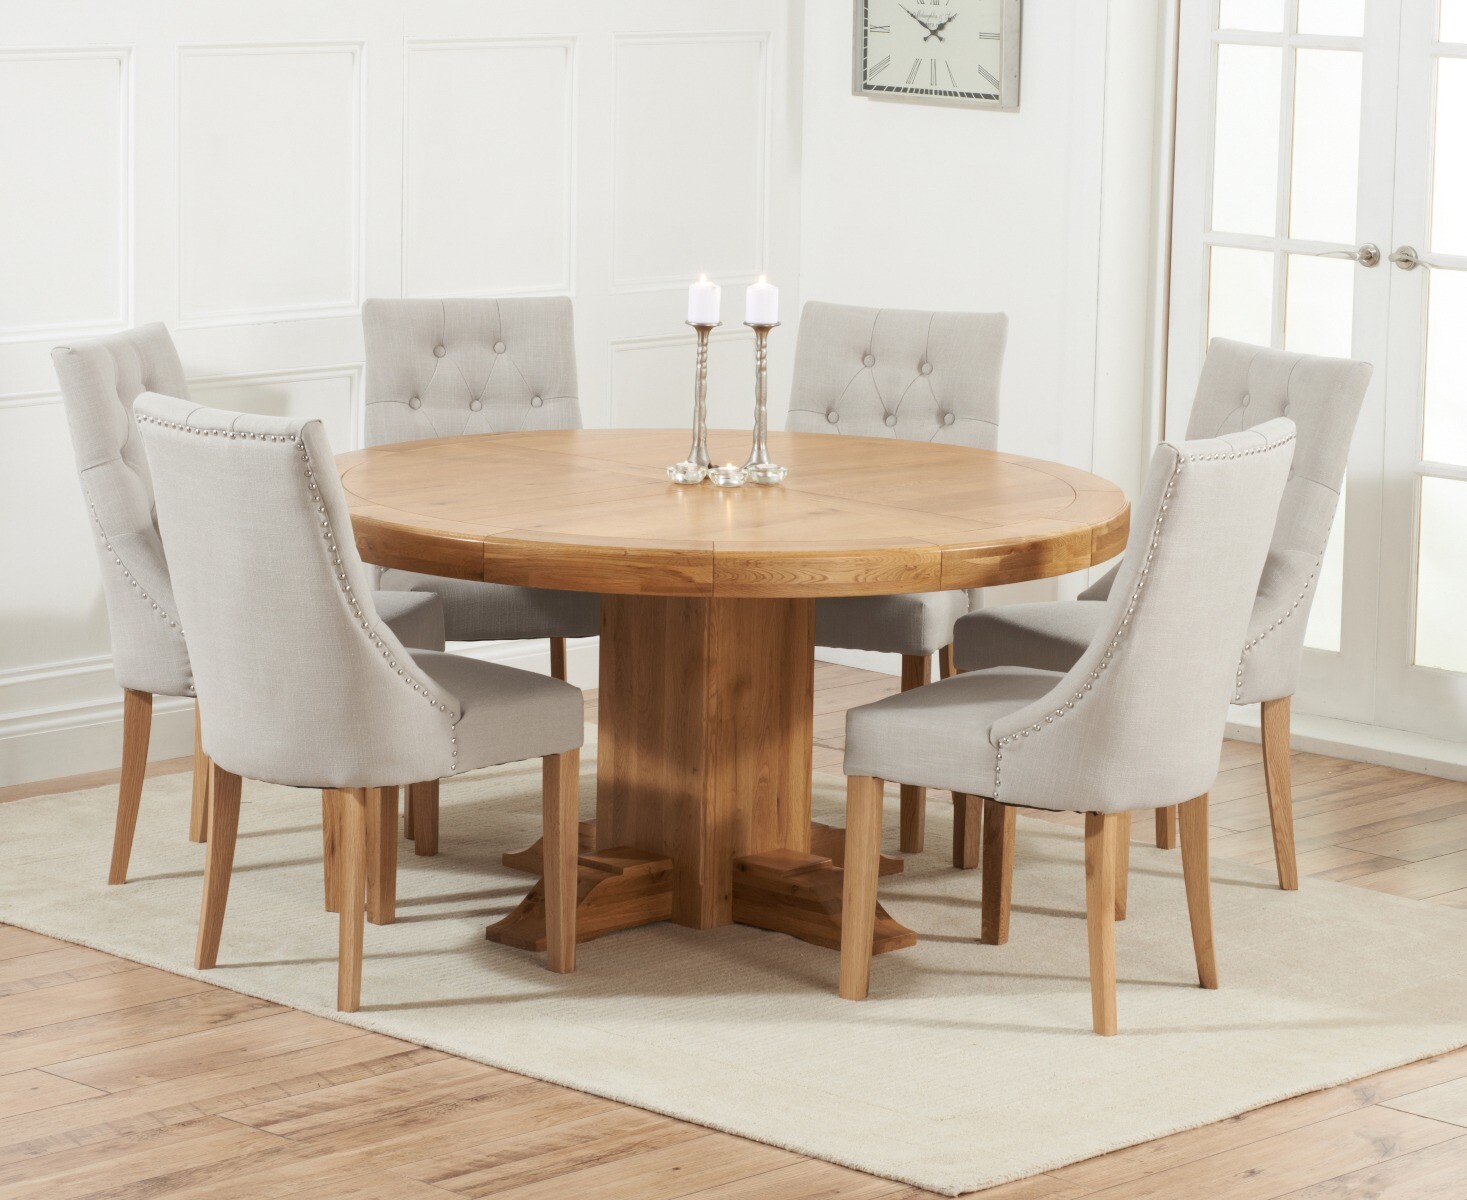 Helmsley 150cm Solid Oak Round Pedestal Dining Table With 8 Natural Beatrix Fabric Chairs